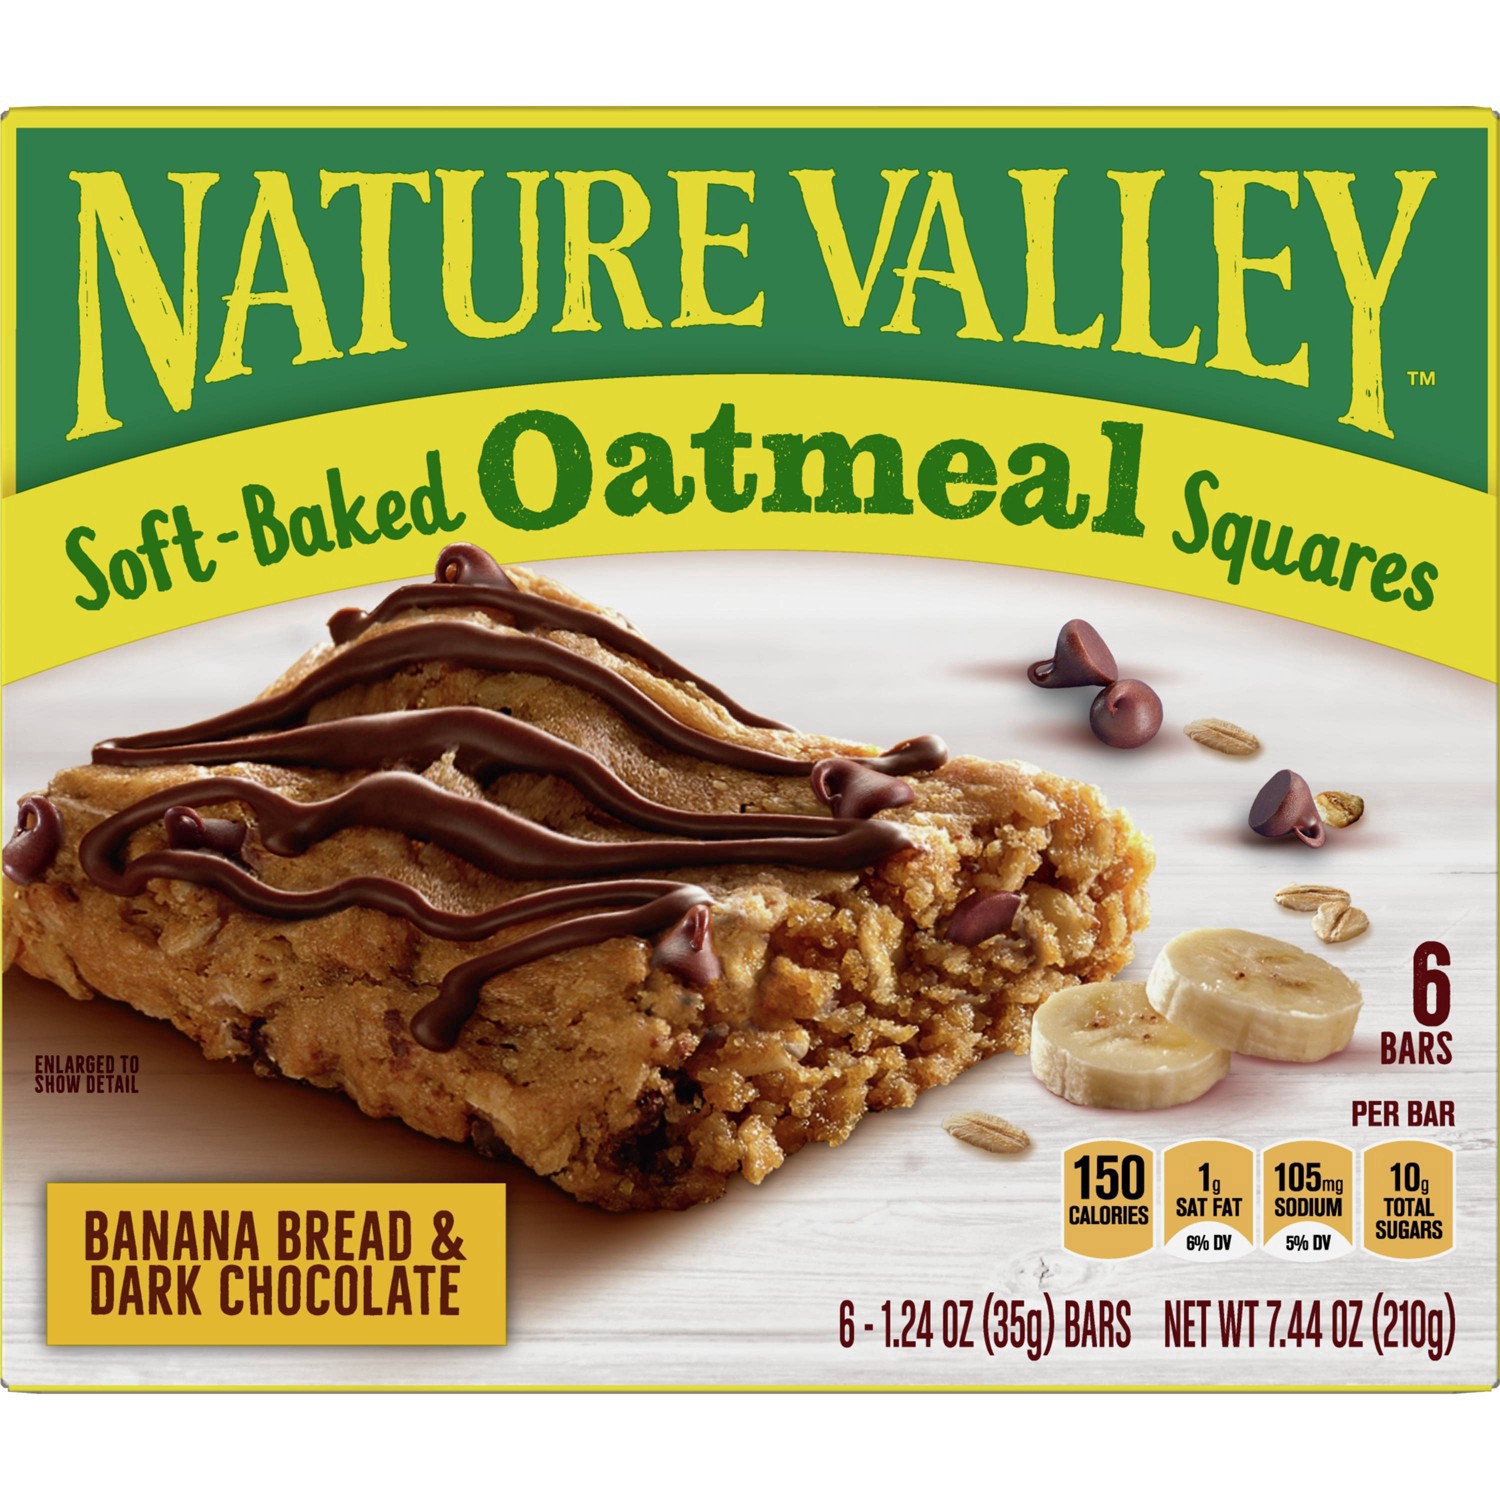 slide 17 of 101, Nature Valley Soft-Baked Oatmeal Squares, Banana Bread & Dark Chocolate, 6 ct, 6 ct